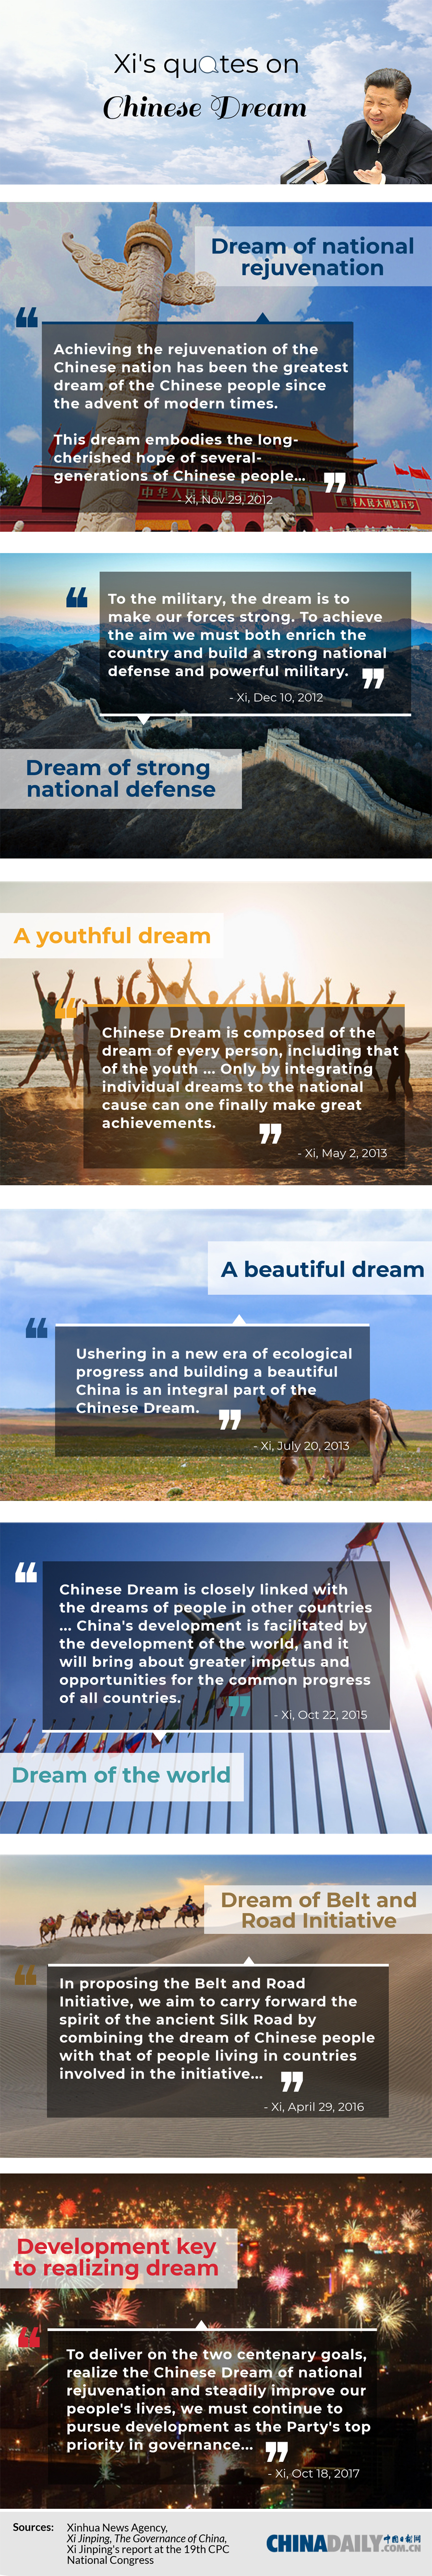 Xi's quotes on Chinese Dream